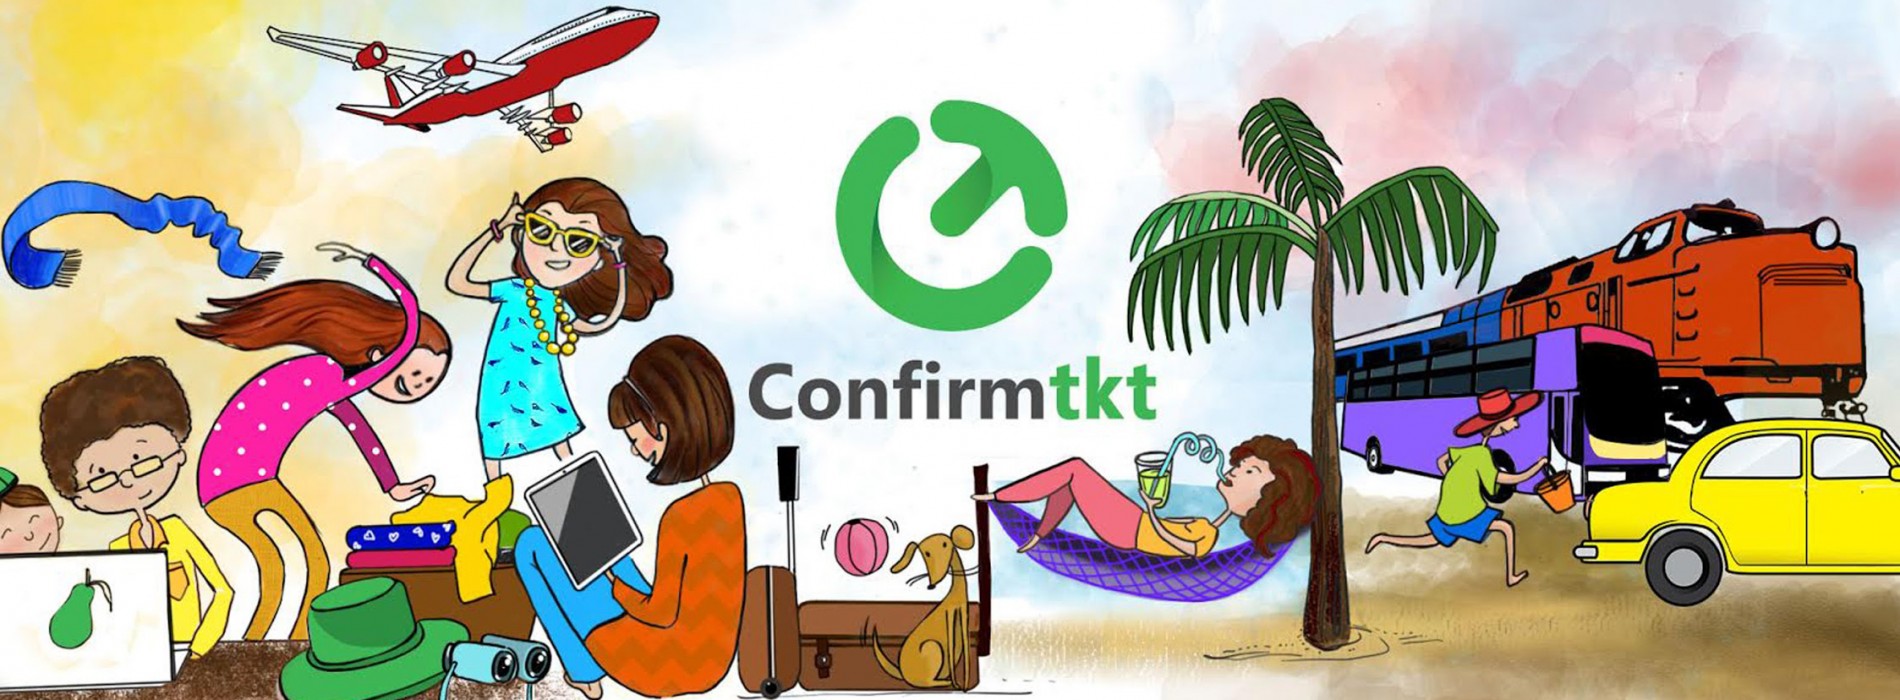 Confirmtkt app assures confirmed ticket to anywhere in India